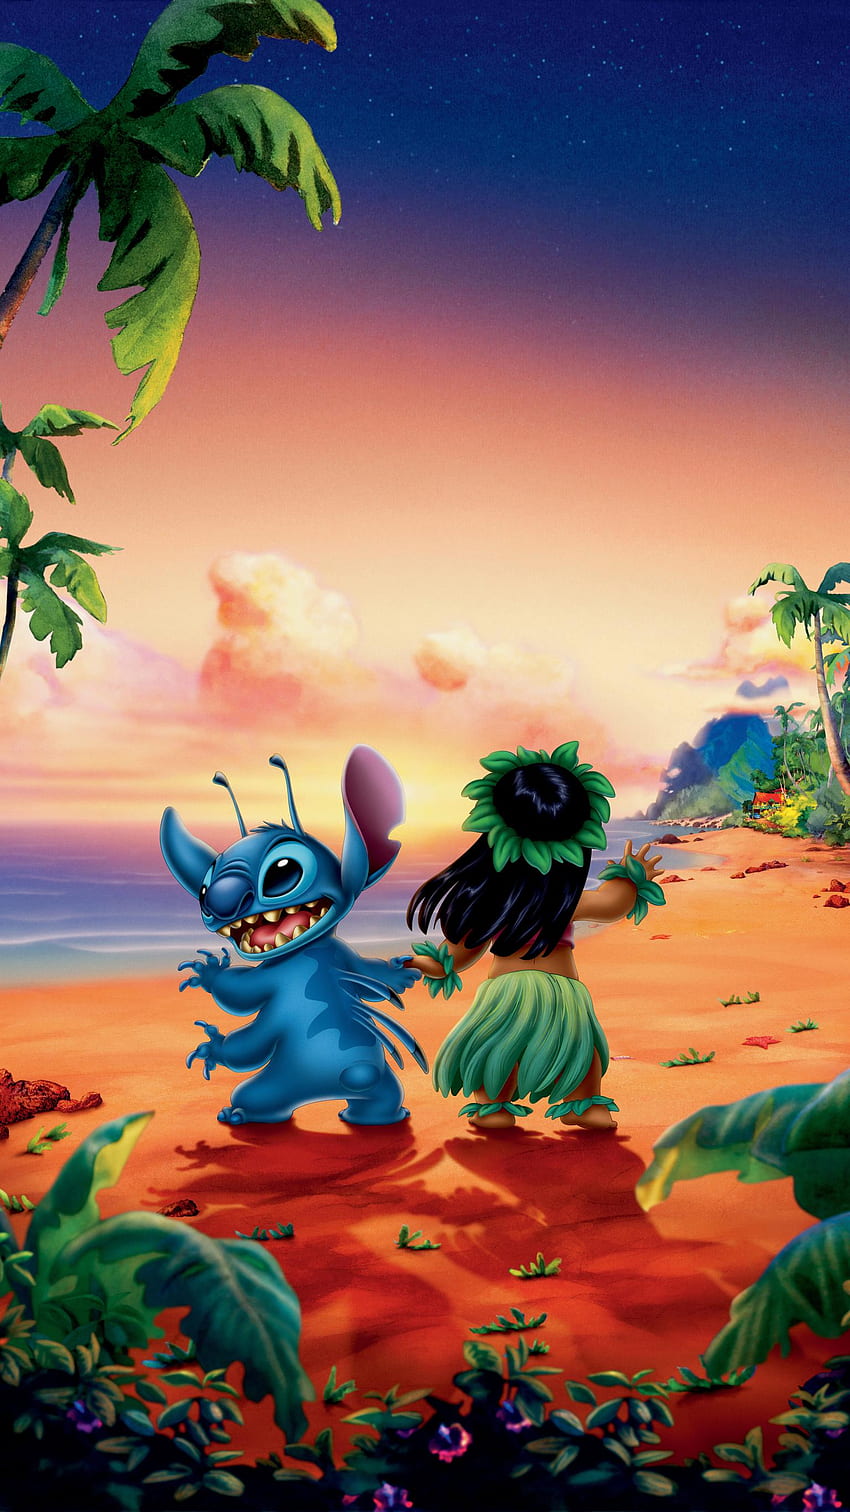 Download Lilo  Stitch wallpapers for mobile phone free Lilo  Stitch  HD pictures